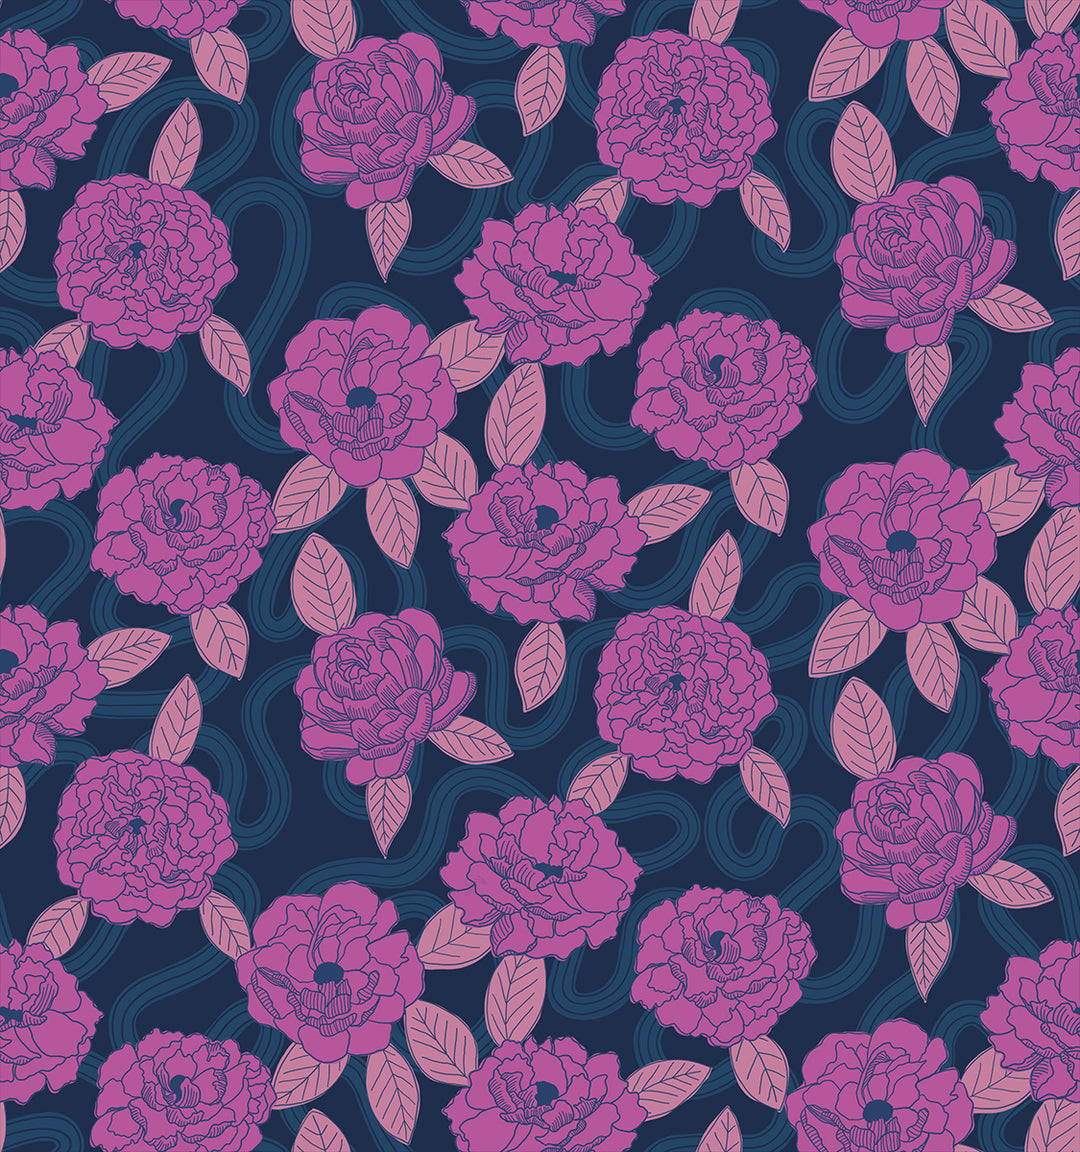 Verbena Navy Peonies Fabric by Jen Hewett for Ruby Star Society / RS6031 13 / Half yard continuous cut